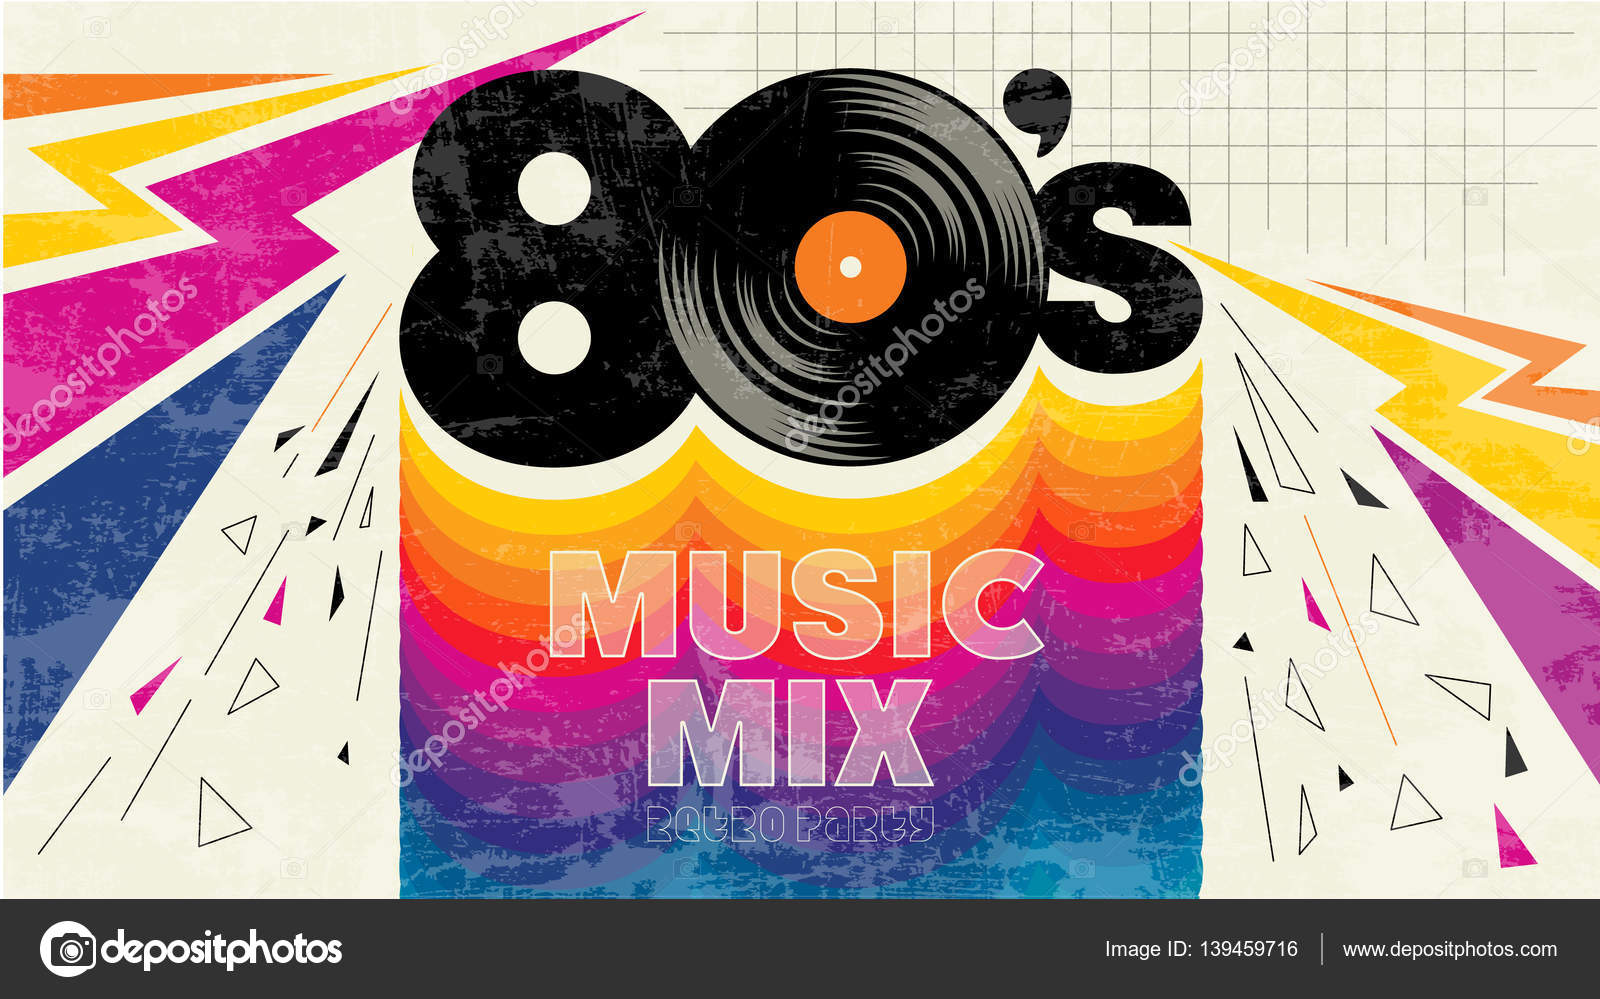 80's music mix. Vintage retro party. Fashion, graphic background style  Stock Illustration by ©brainpencil1 #139459716